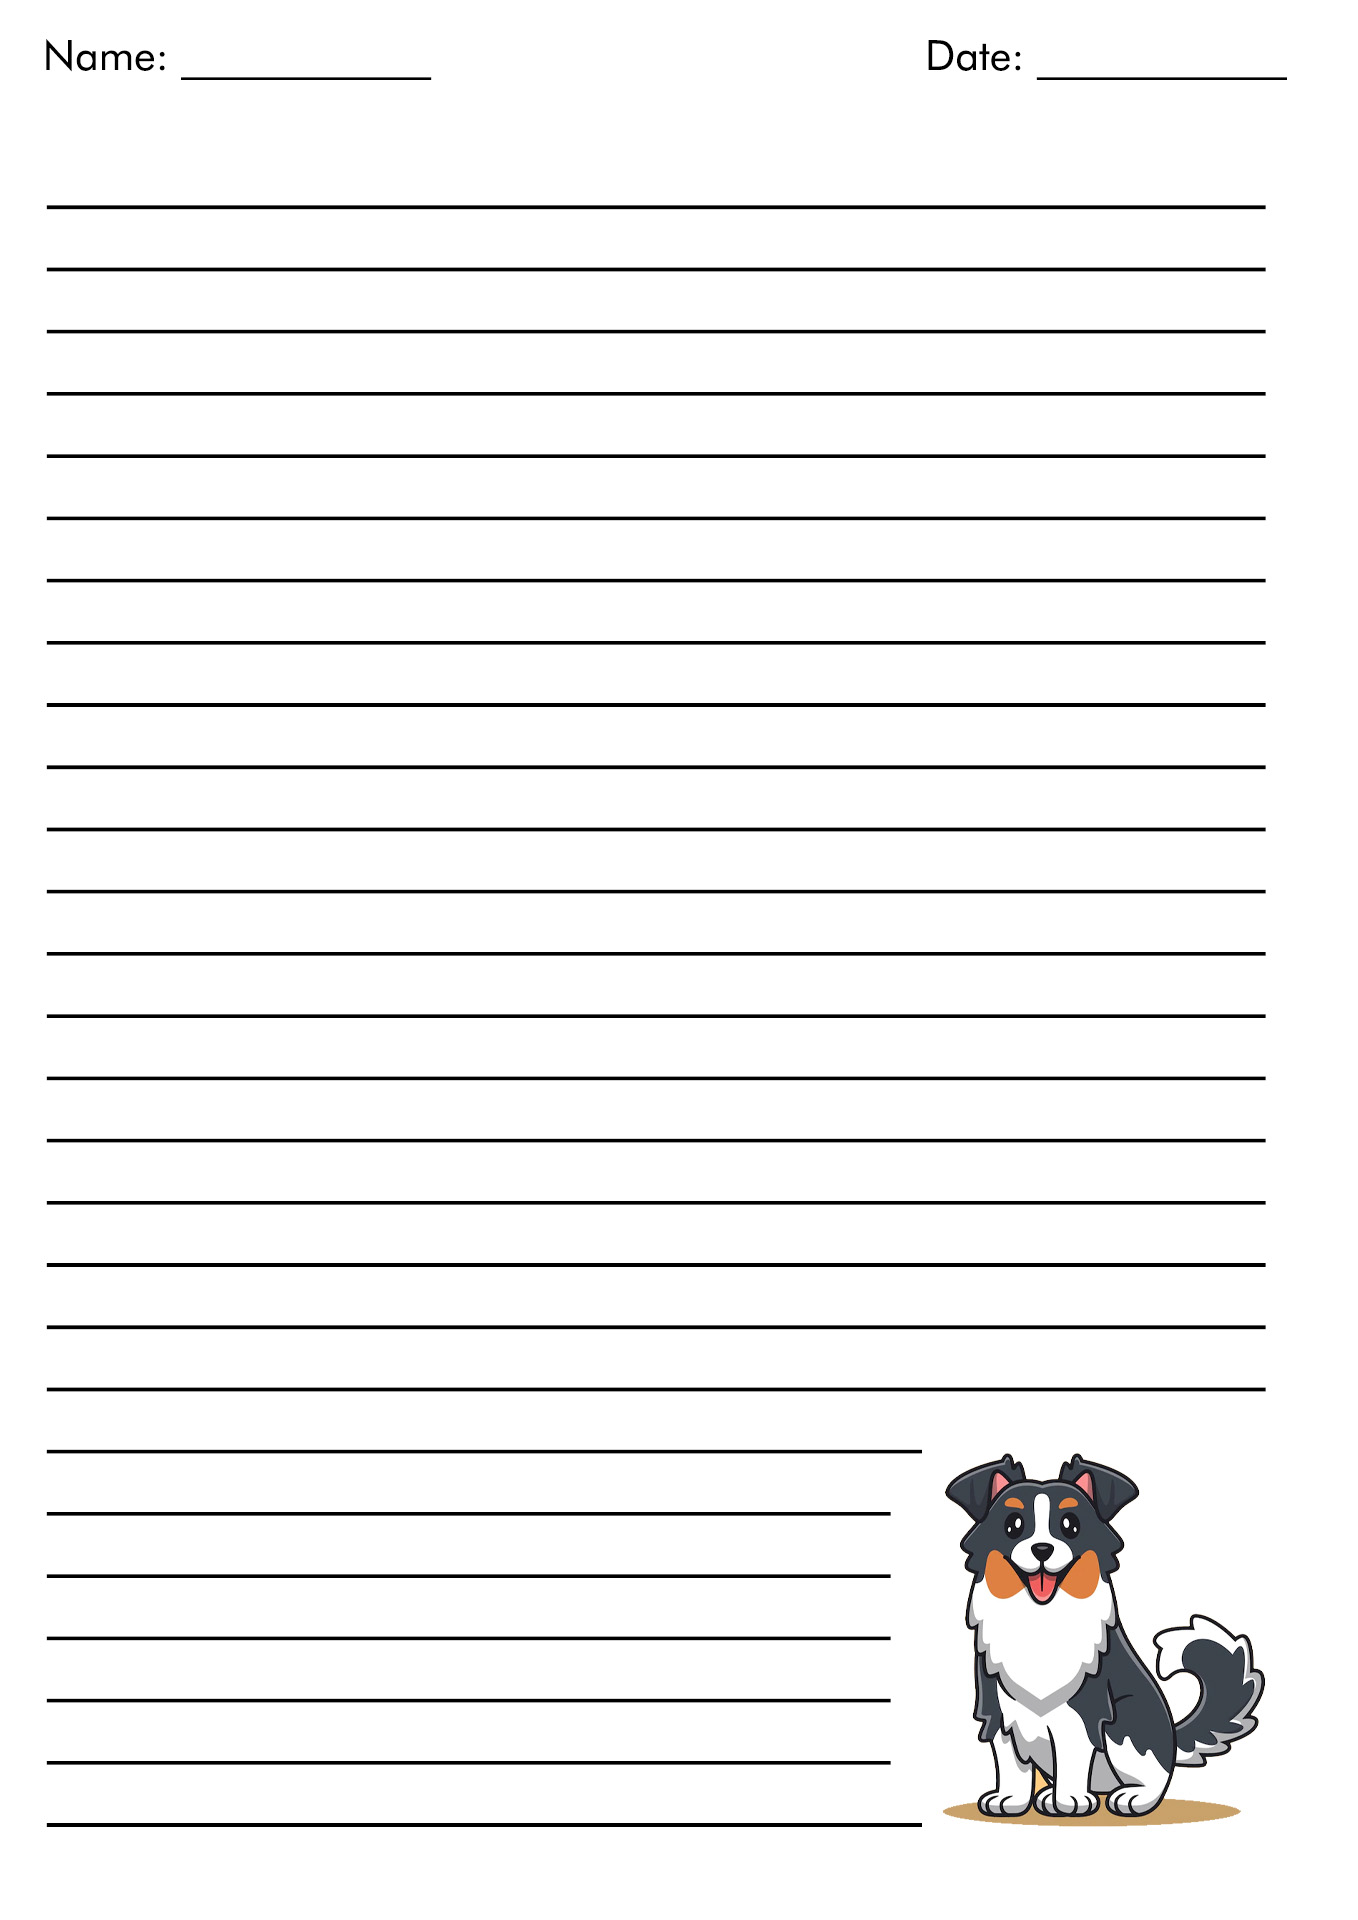 Printable Lined Paper Template Image